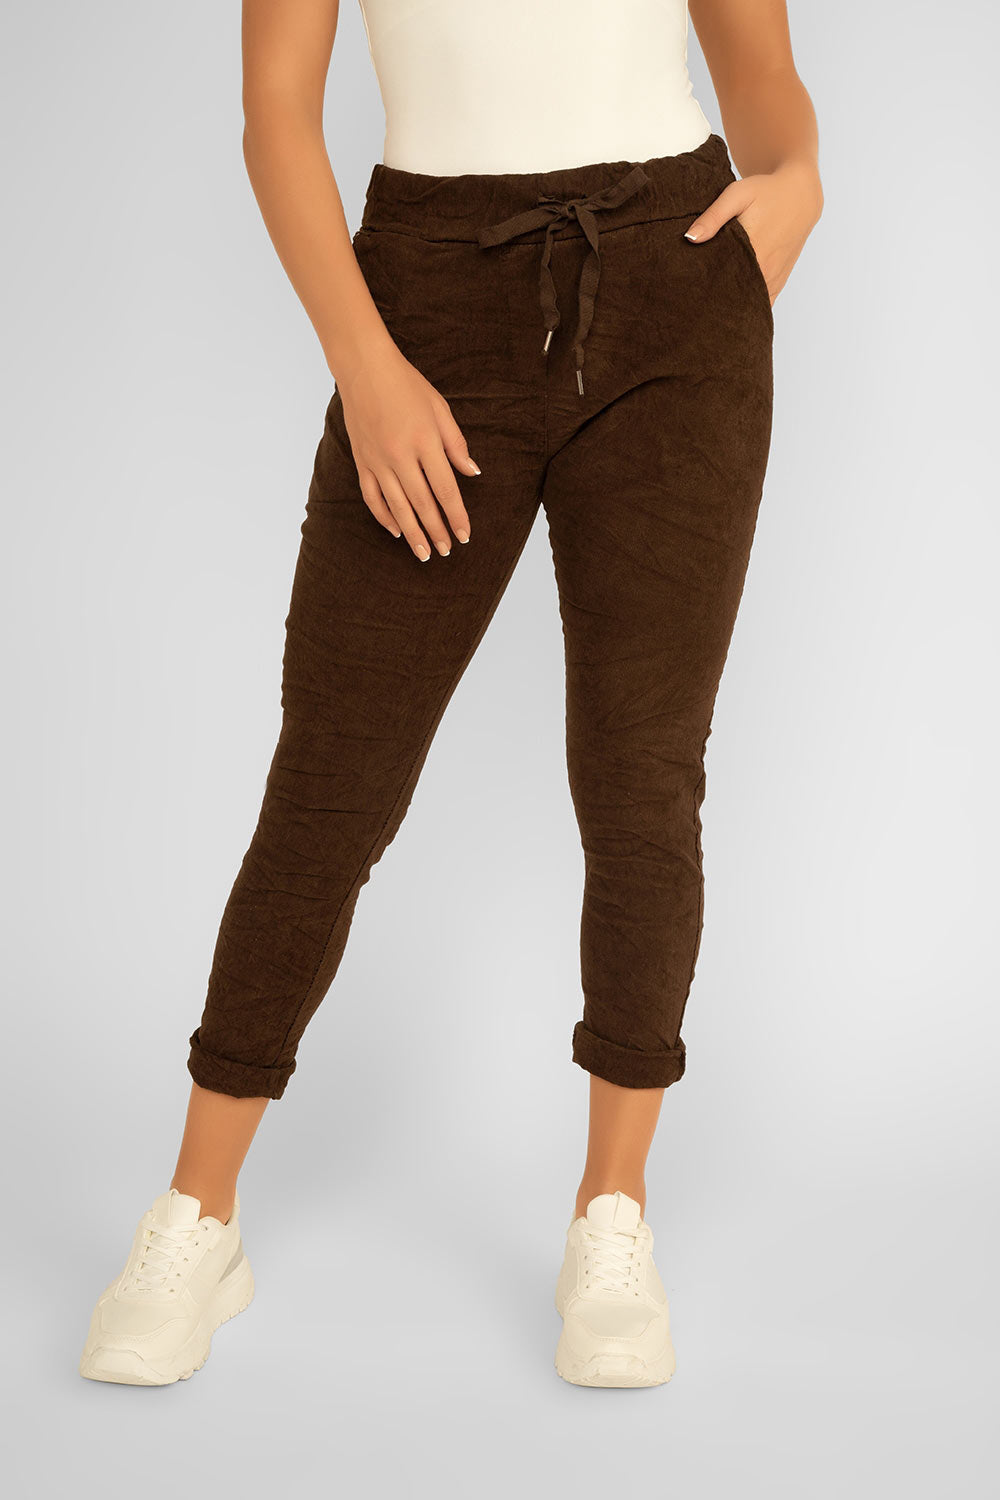 Women's Clothing ELISSIA (NF10440) Pull-On Mini Corduroy Pants in CHOCOLATE